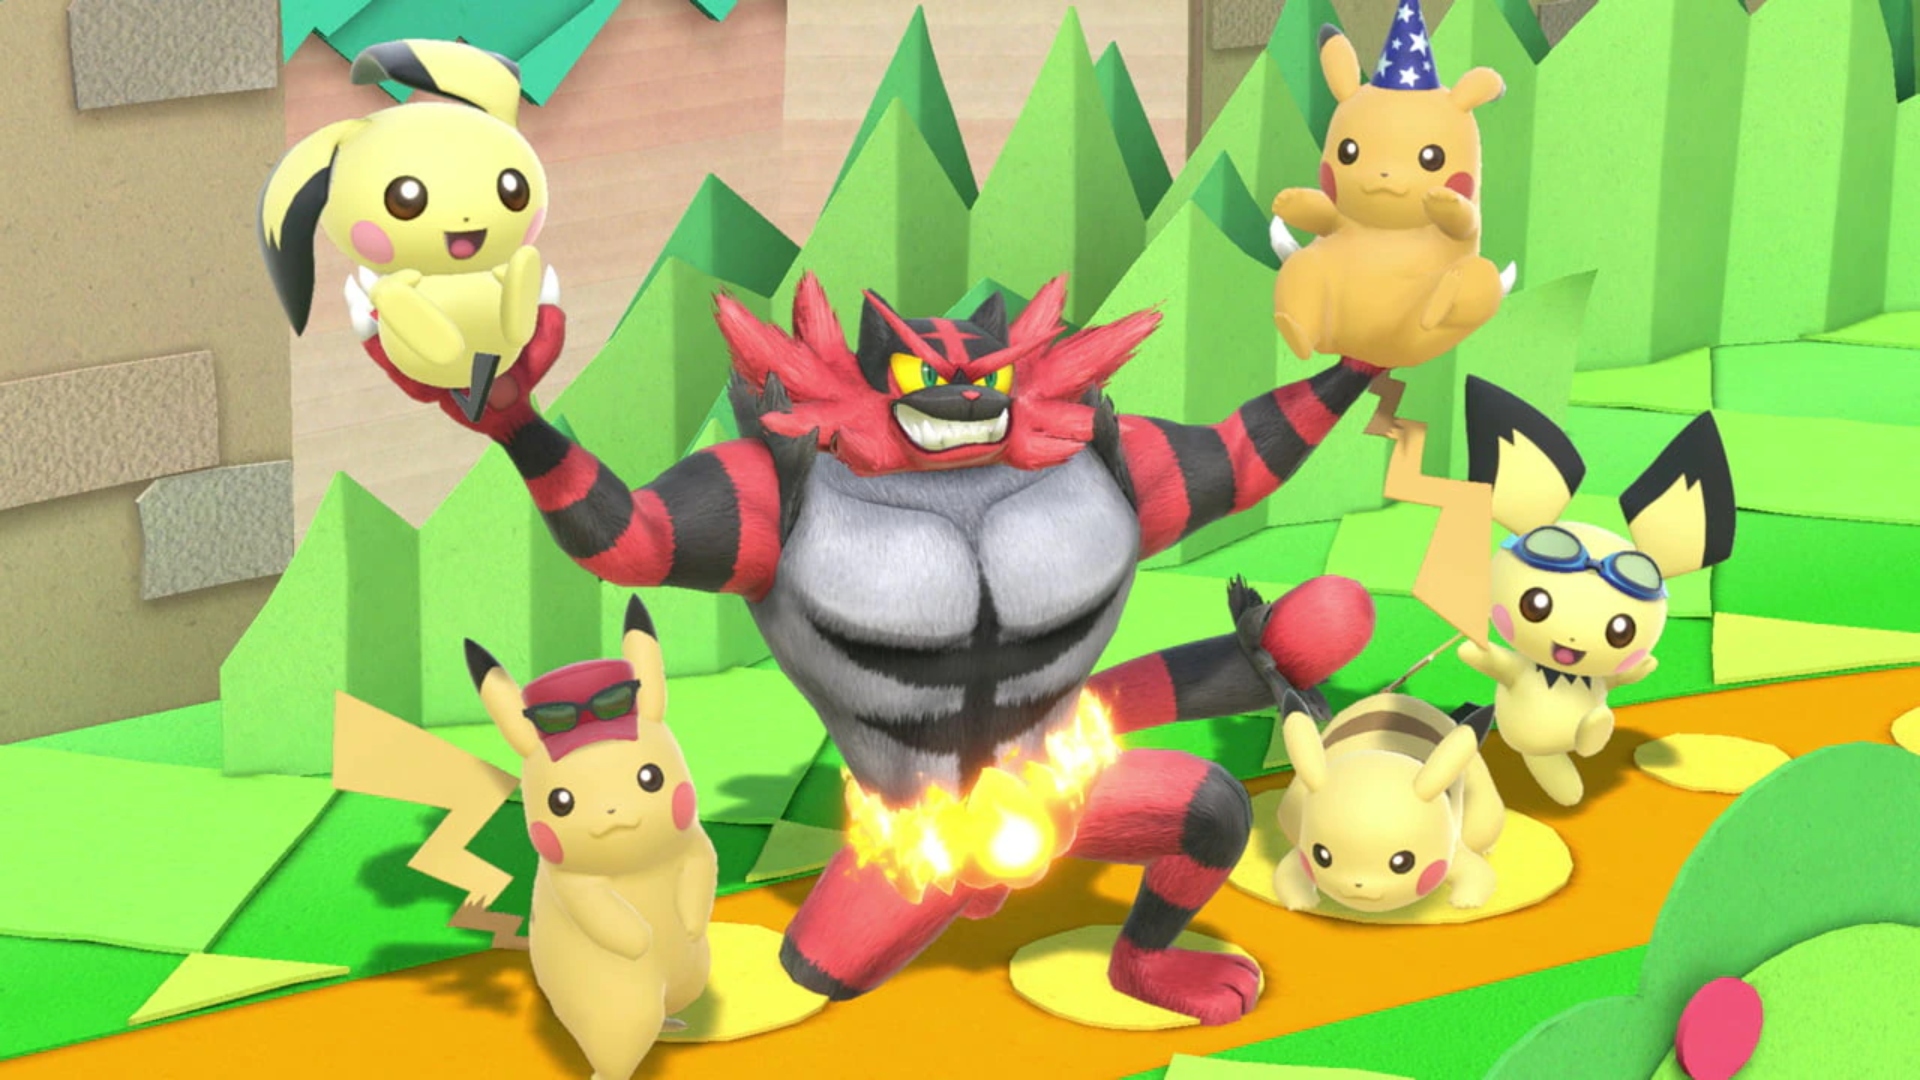 Pokémon Switch games: Super Smash Bros. Ultimate. Image shows an Incineroar alongside a group of Pichu and Pikachu.